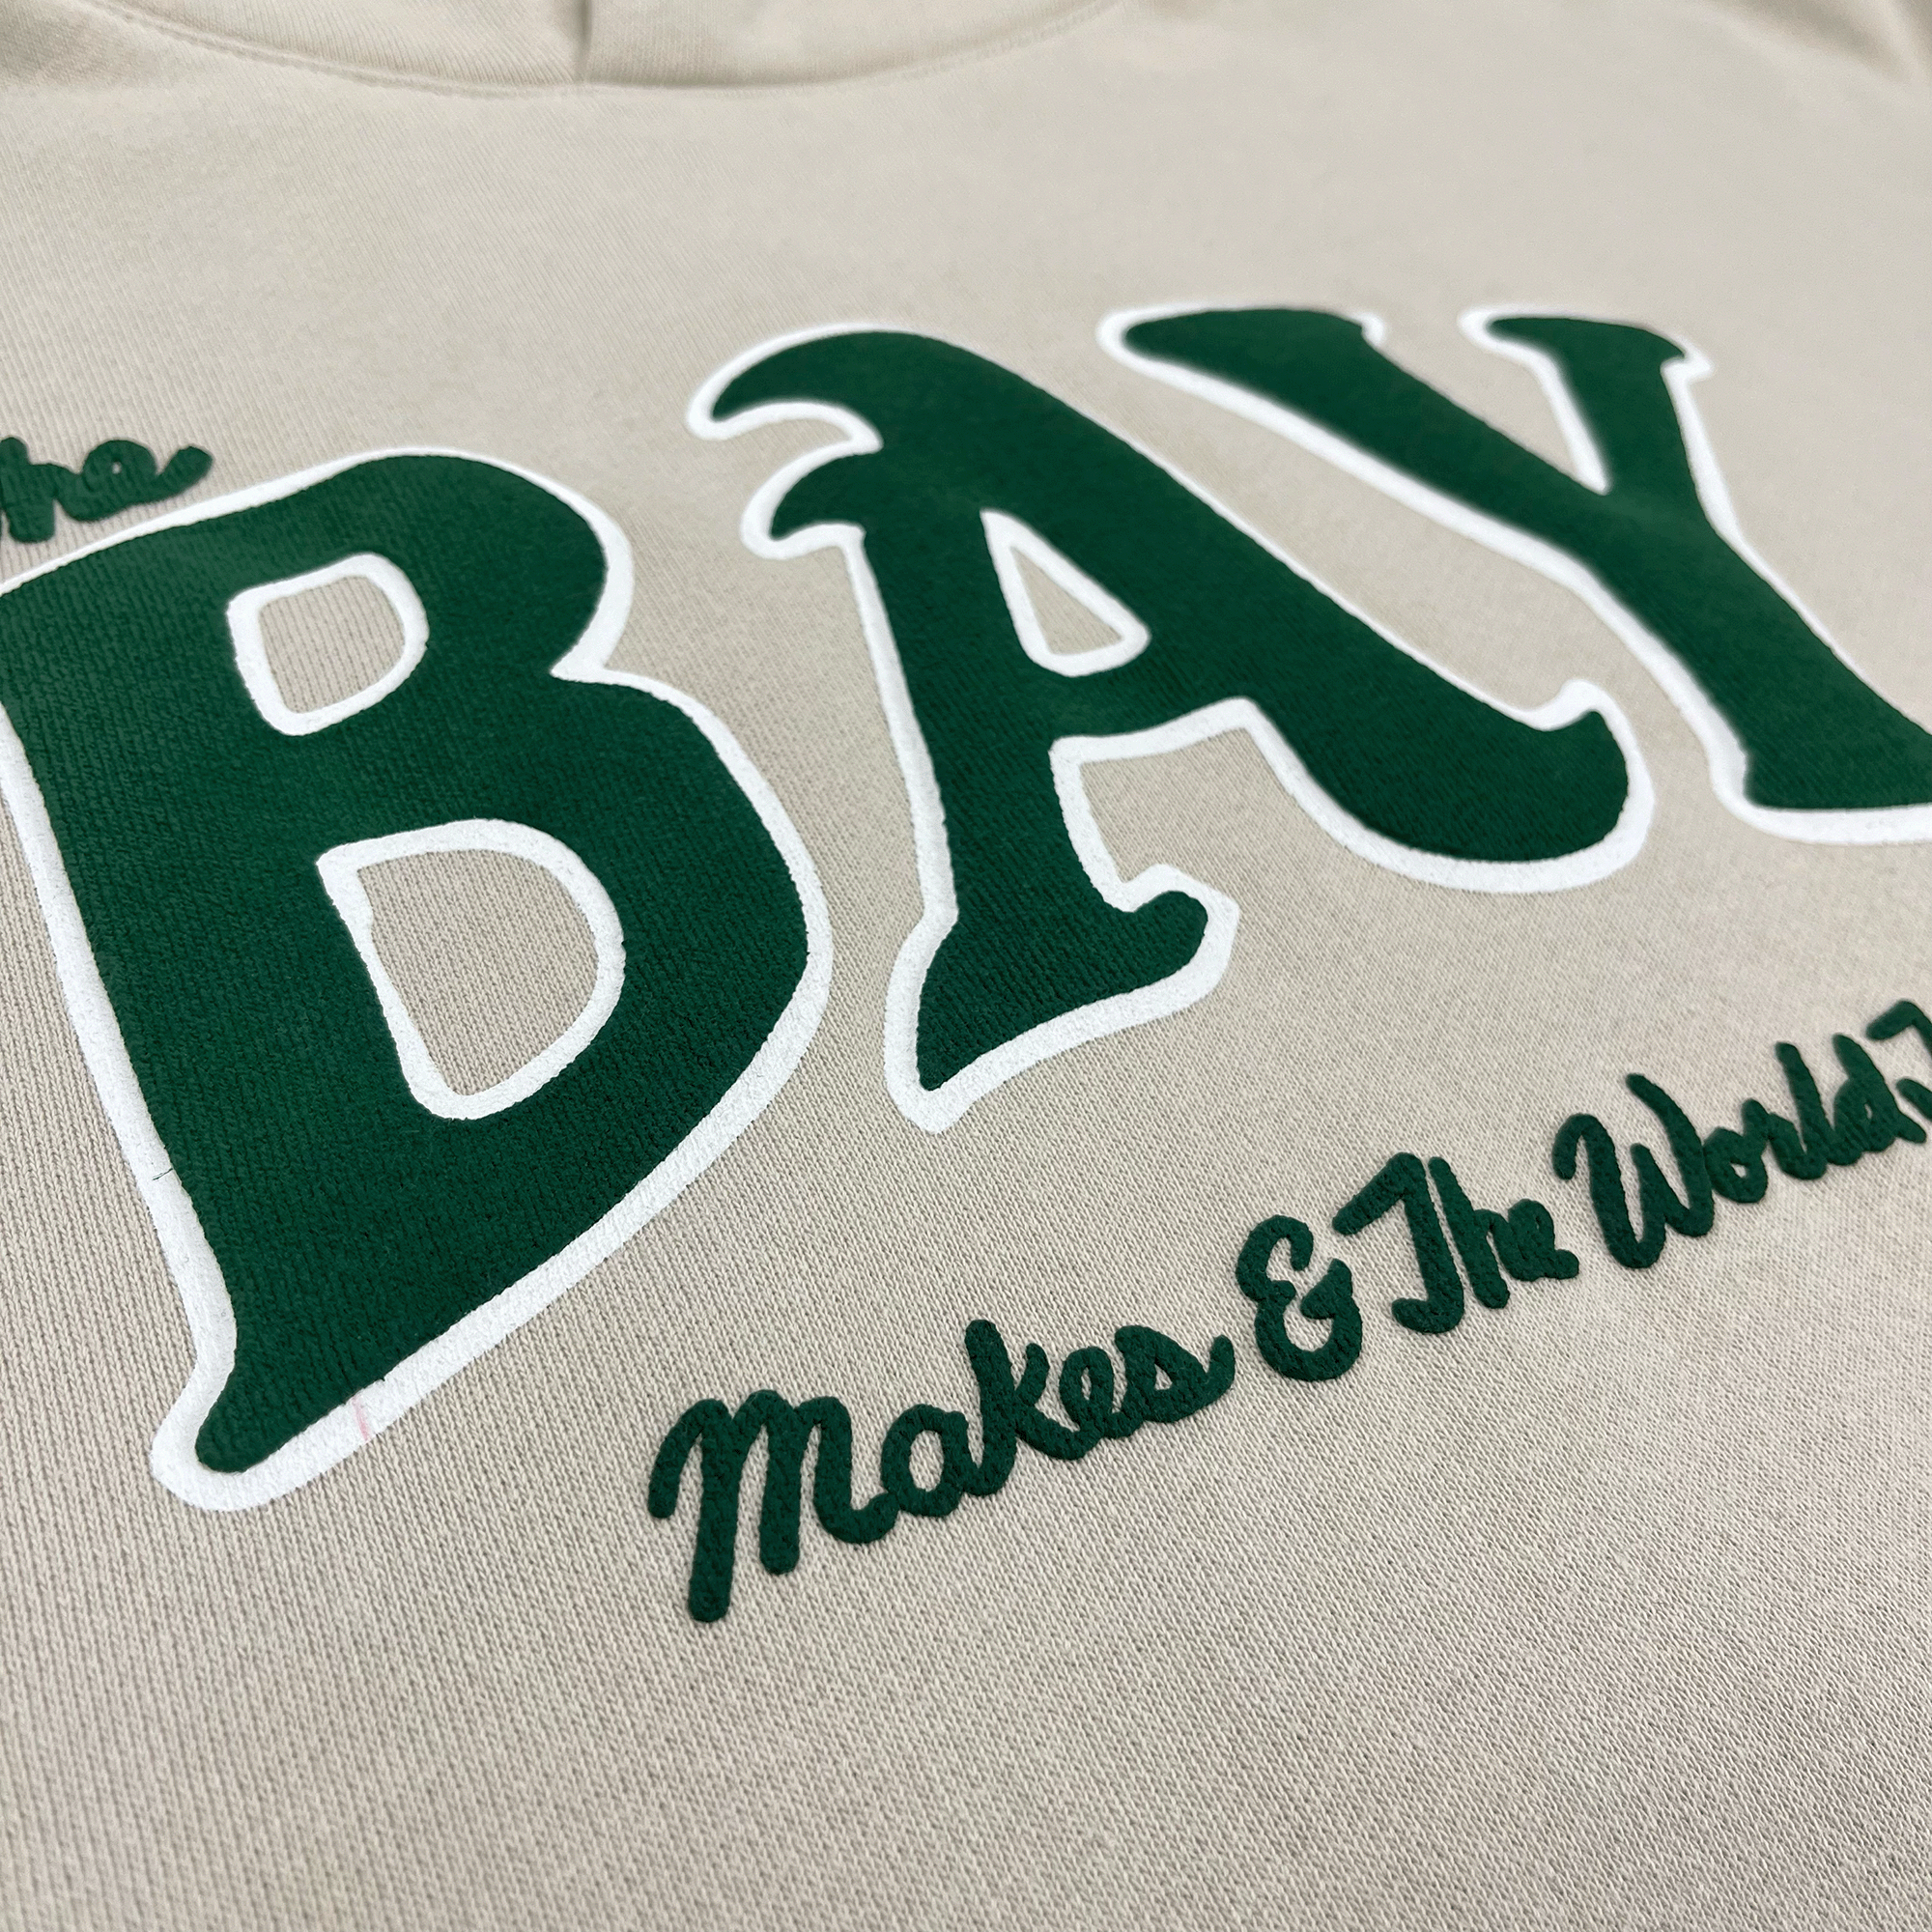 Close-up of green and white The Bay Makes, The World Takes logo on the front chest of an ivory hooded sweatshirt.